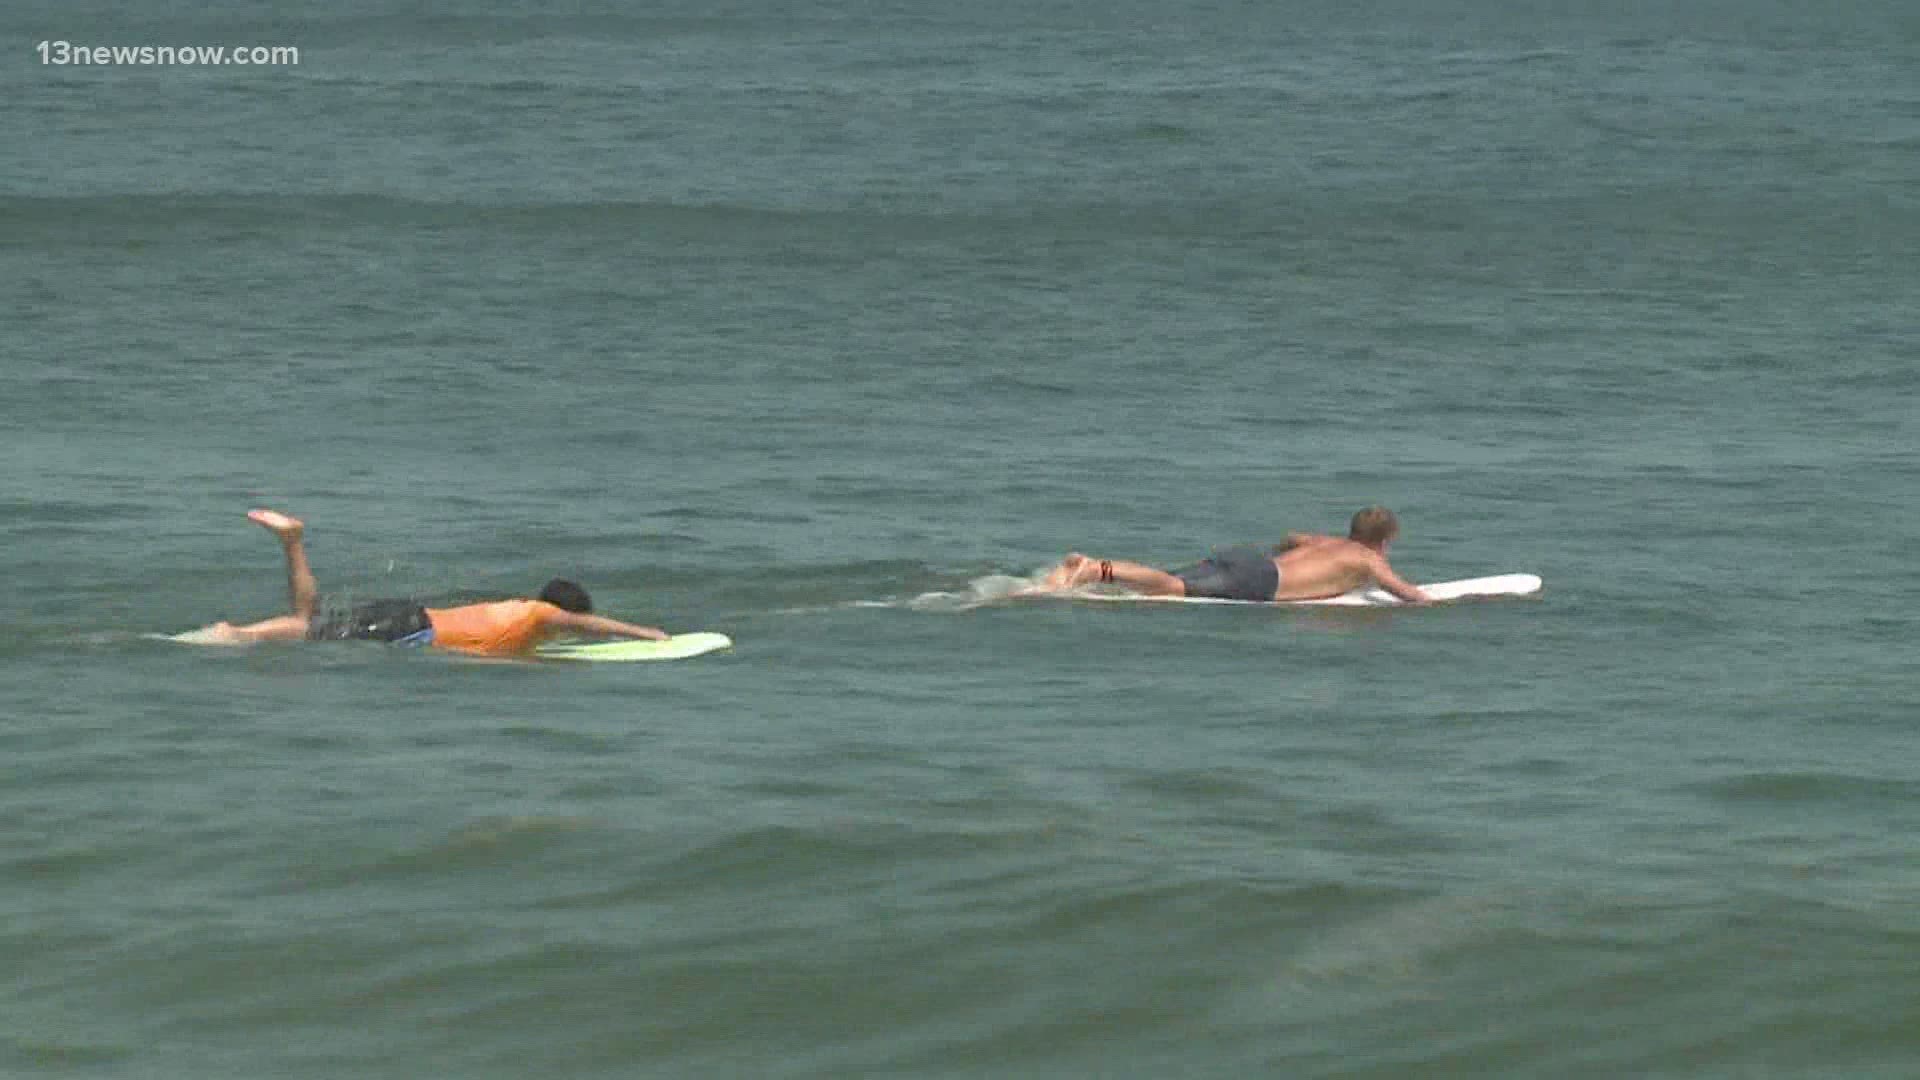 Tuesday is the first day of the 2020 East Coast Surfing Championships. Organizers were determined to go forward with the event, despite the coronavirus pandemic.